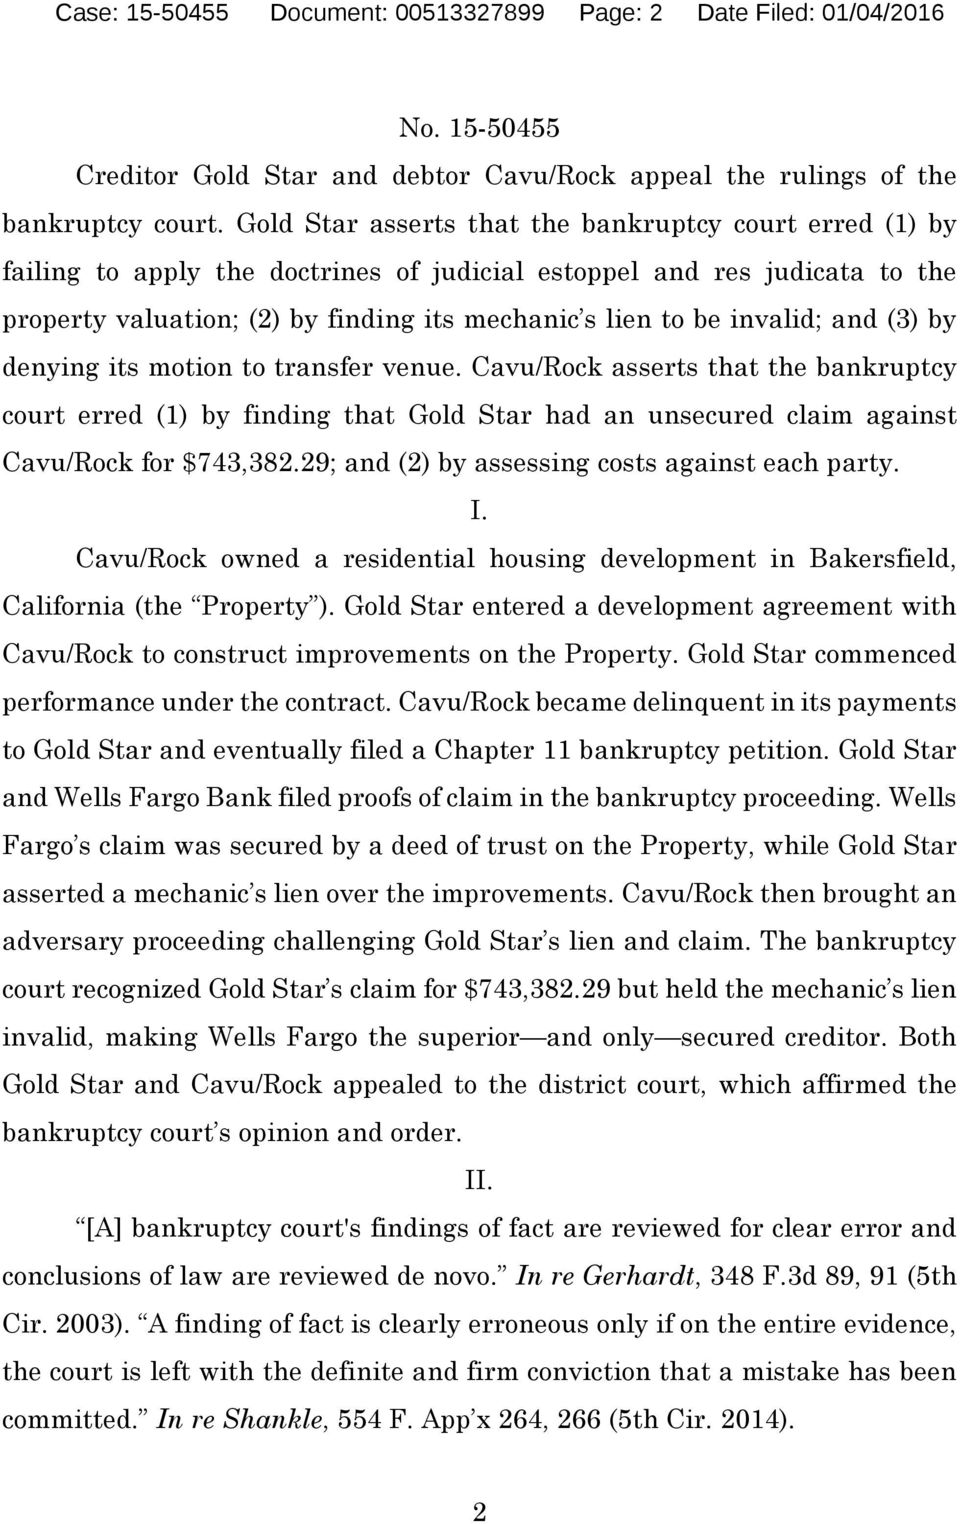 invalid; and (3) by denying its motion to transfer venue. Cavu/Rock asserts that the bankruptcy court erred (1) by finding that Gold Star had an unsecured claim against Cavu/Rock for $743,382.